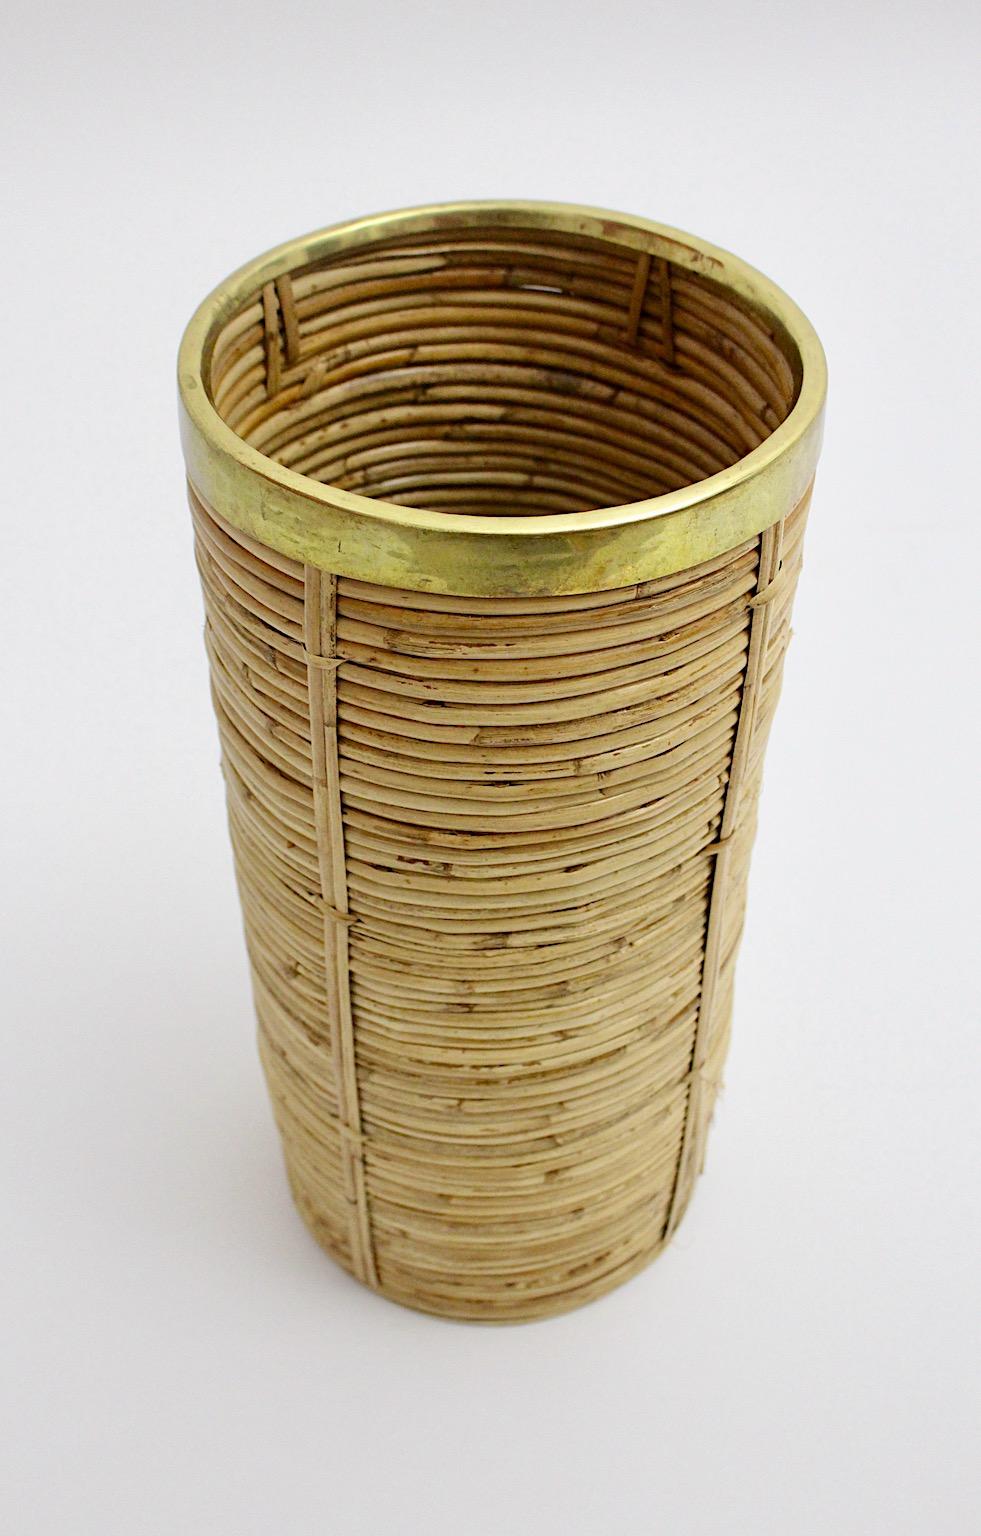 Late 20th Century Riviera Style Organic Rattan Brass Paper Basket or Cane Holder, 1970s, Italy For Sale